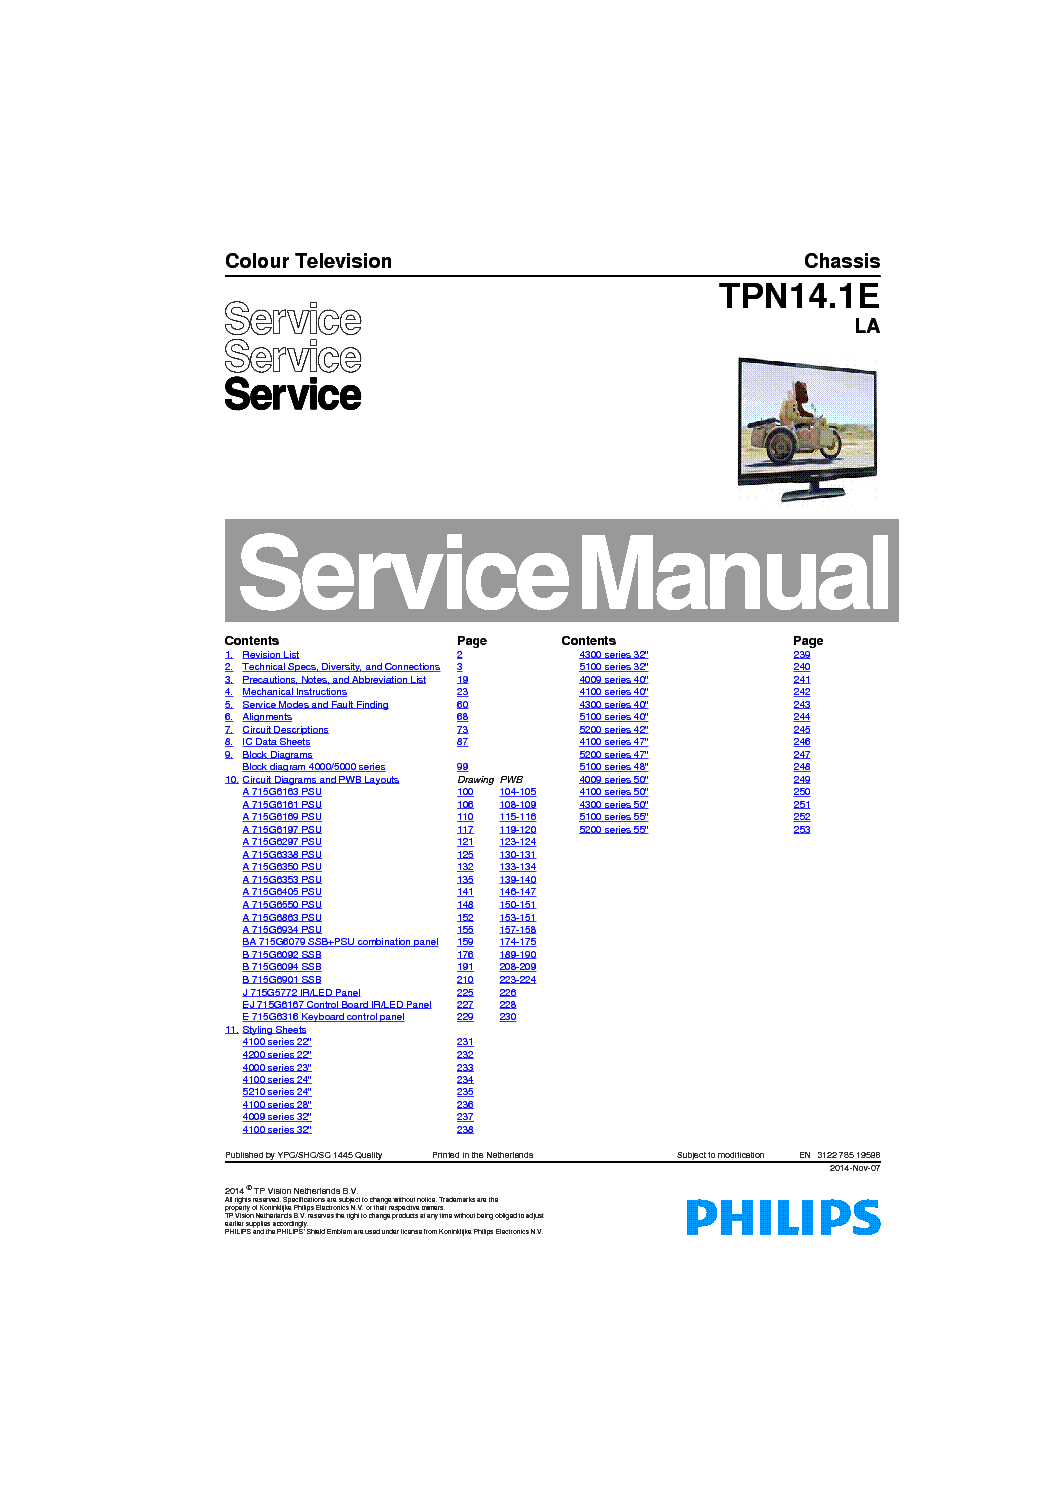 PHILIPS TPN14.1ELA 312278519598 141107 service manual (1st page)